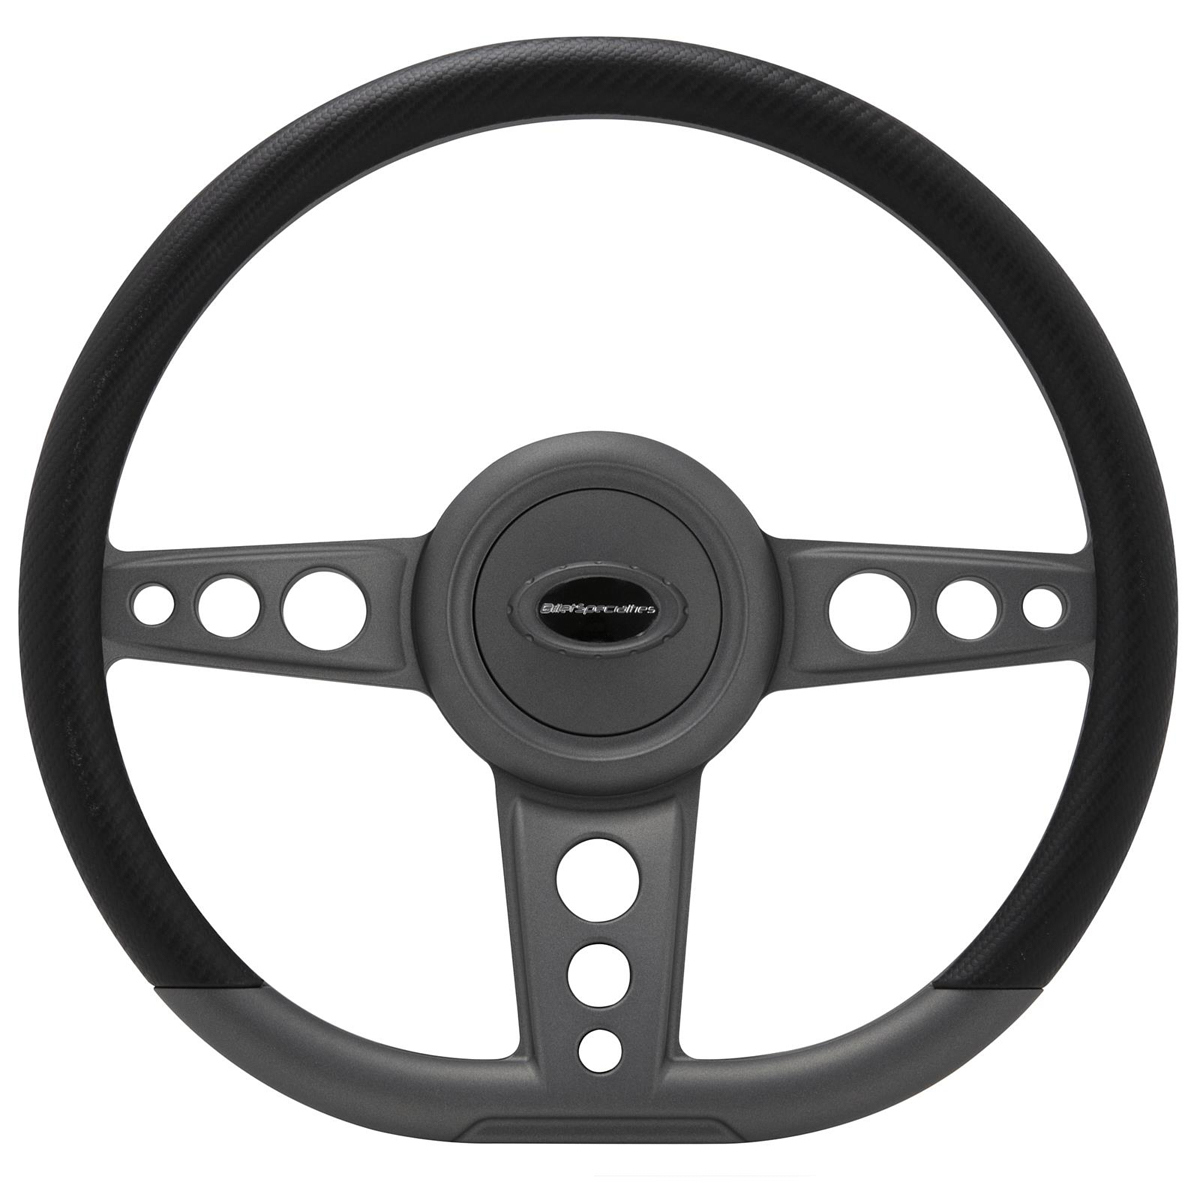 Billet Specialities 294271 Steering Wheel, Trans Am, 14 in Diameter, D-Shaped, 2 in Dish, 3-Spoke, Milled Finger Notches, Aluminum, Gray Anodized, Each